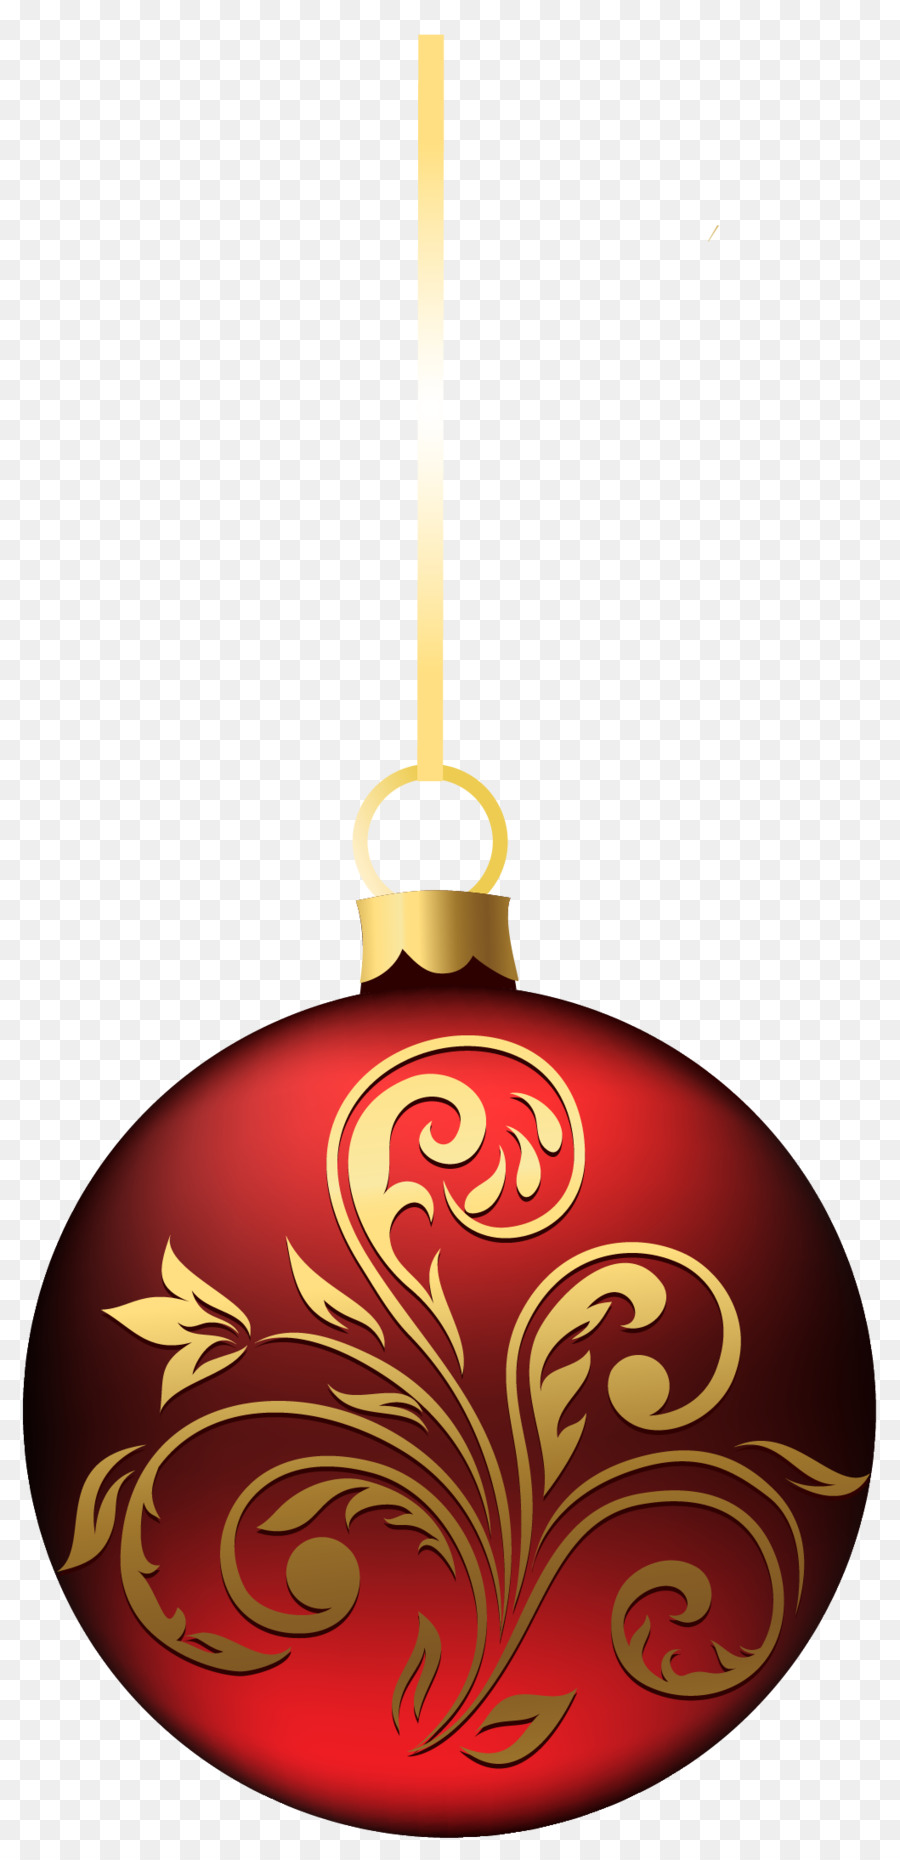 Christmas ornament Christmas decoration Clip art - christmas candy png download - 1059*2181 - Free Transparent Christmas Ornament png Download.